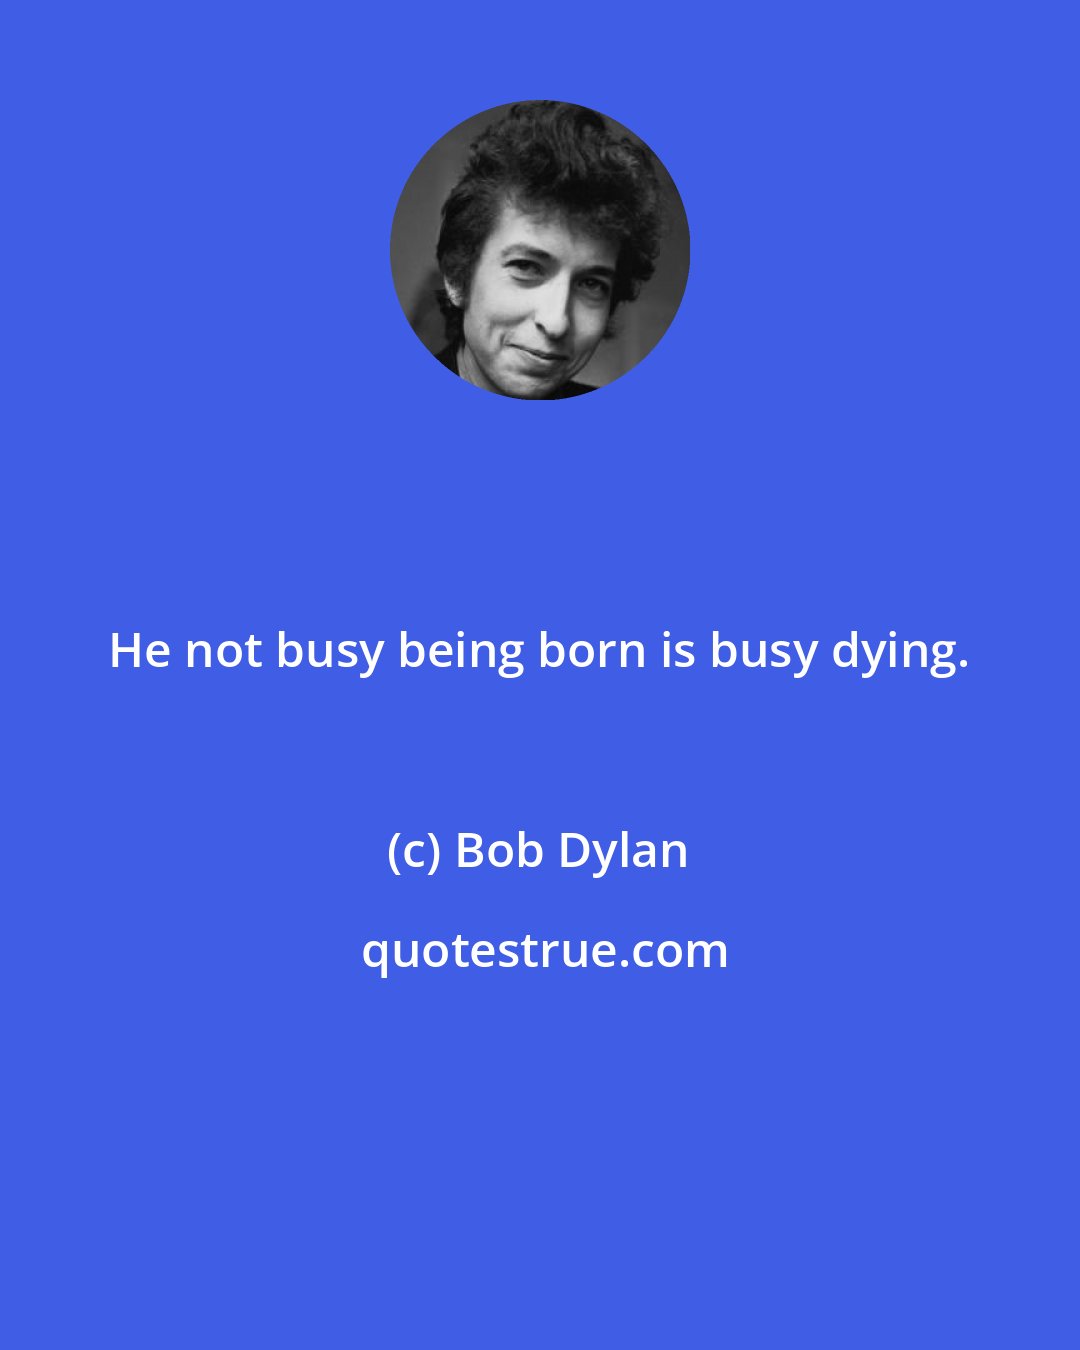 Bob Dylan: He not busy being born is busy dying.